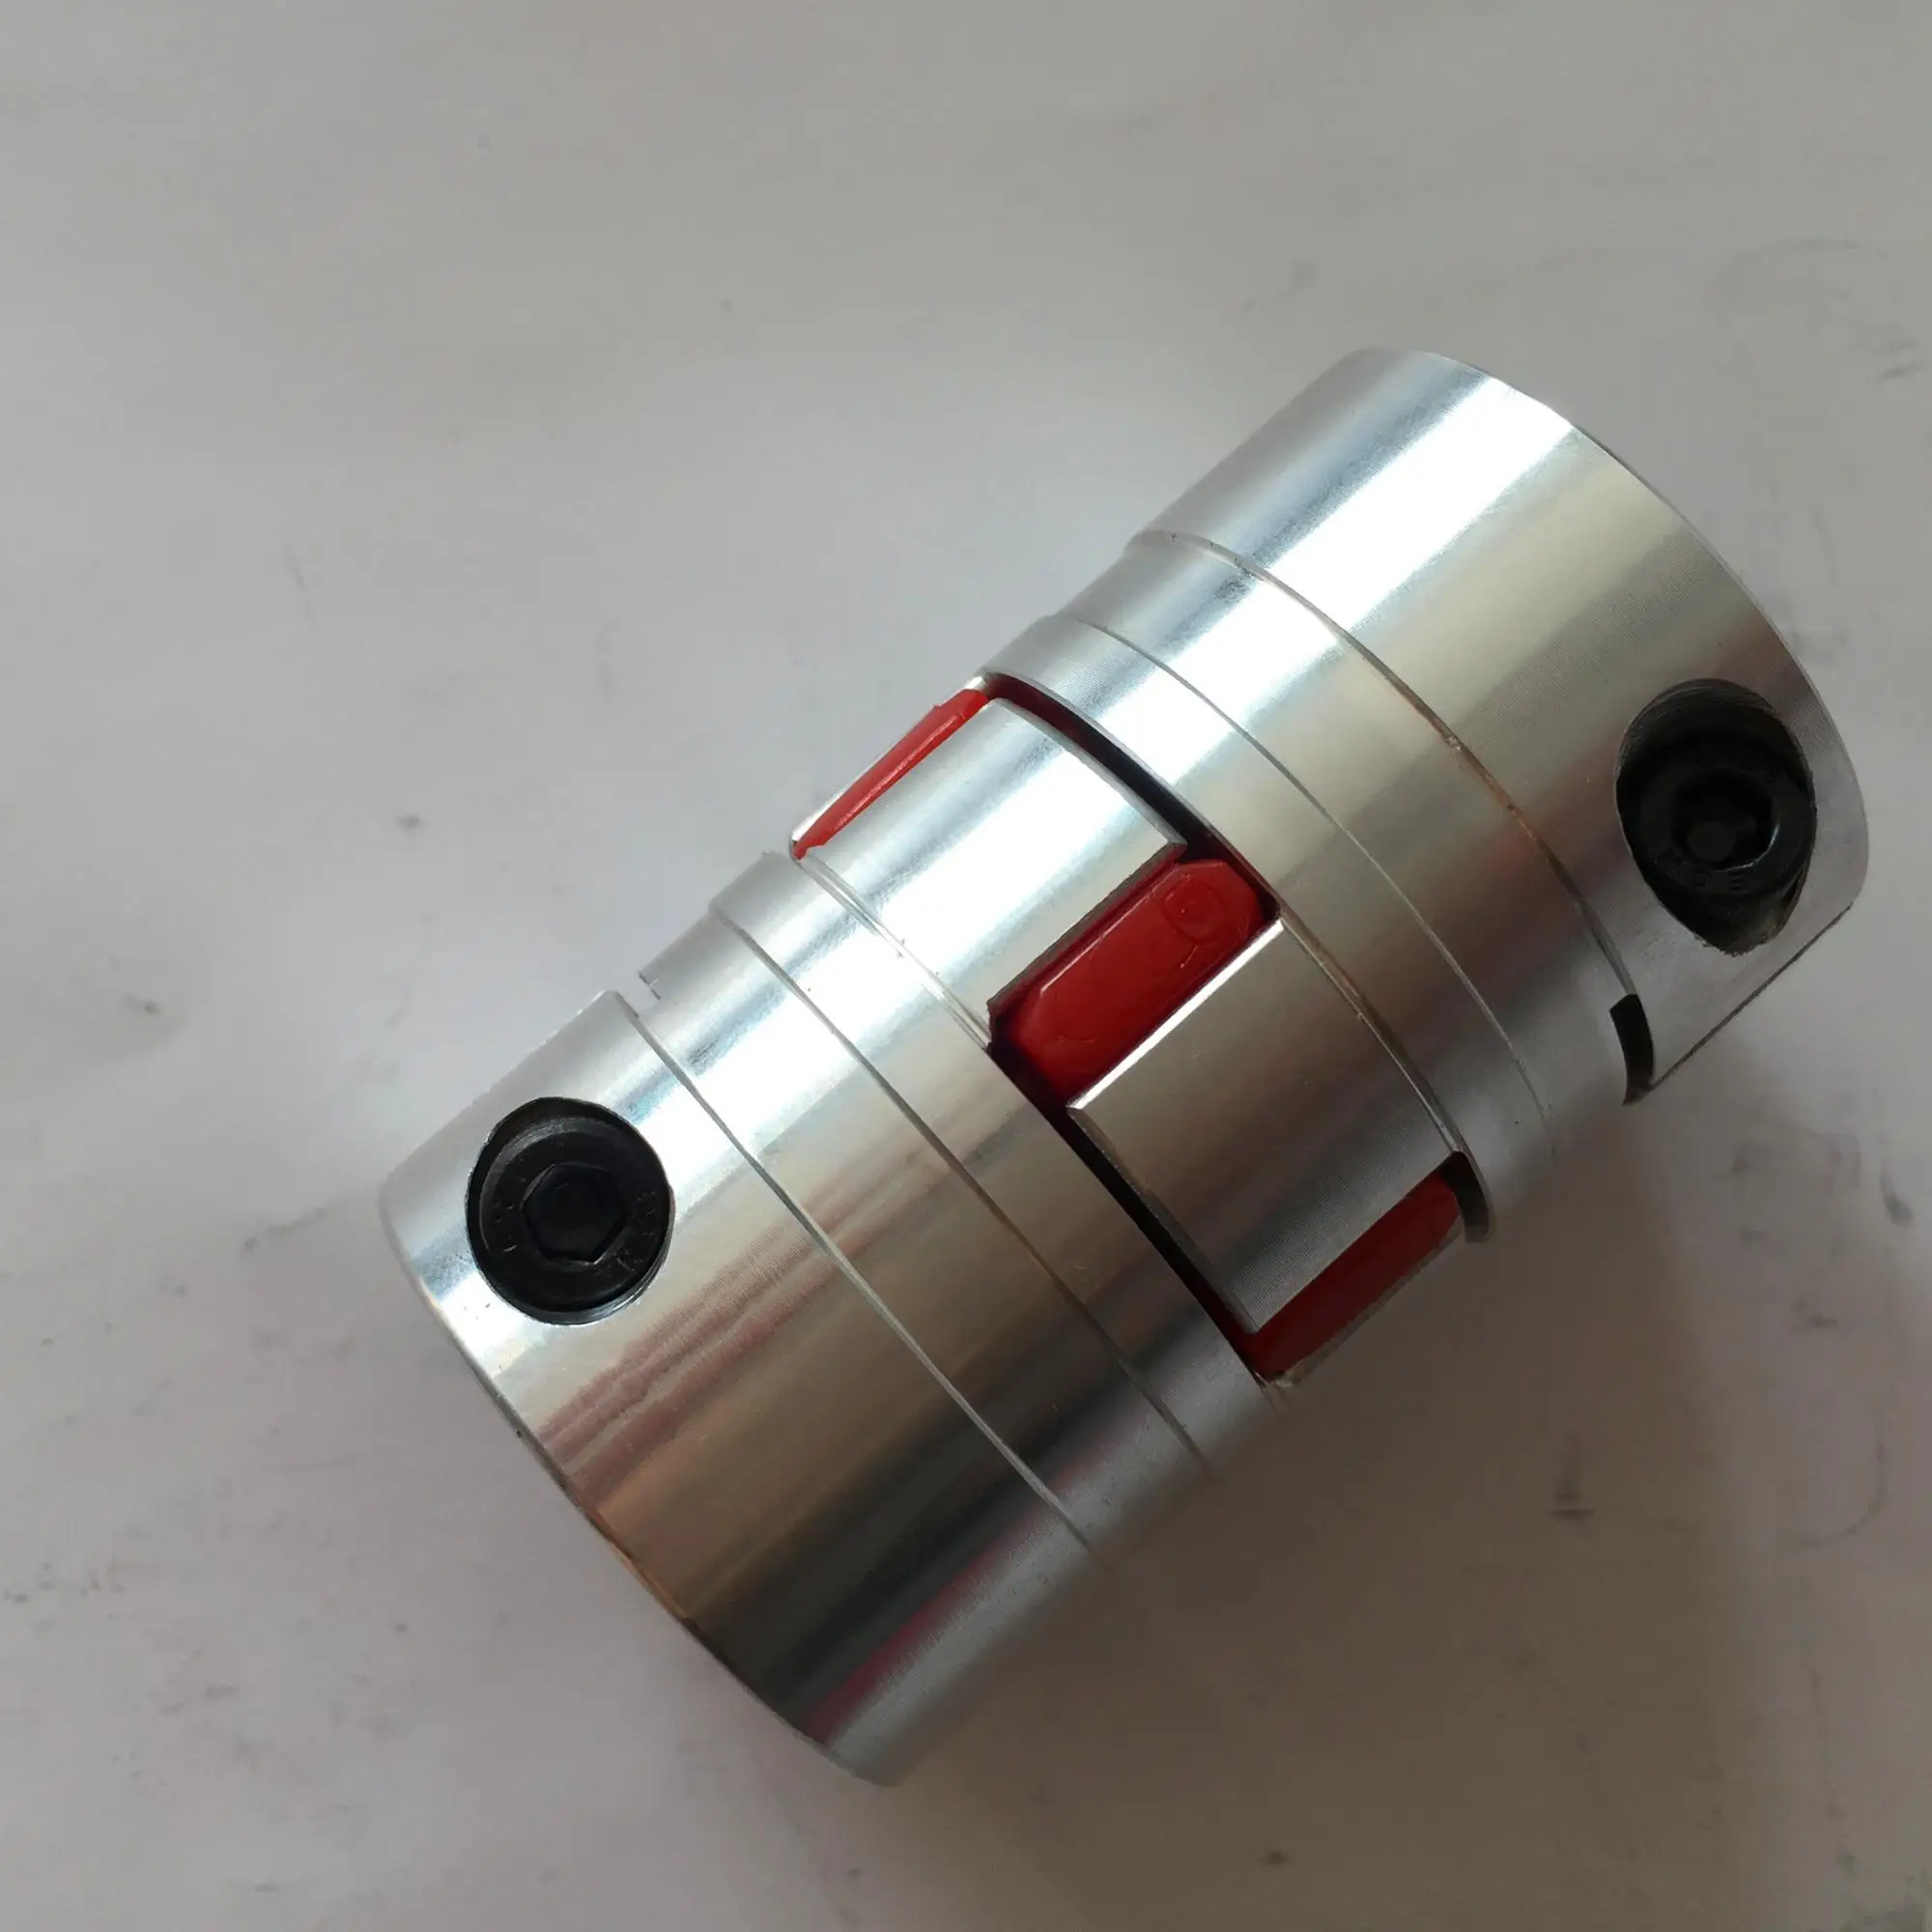 Aluminum Alloy 38mm OAL 10 to 11mm Bore Servo Motor Flexible Coupling 34mm OD Clamp Style